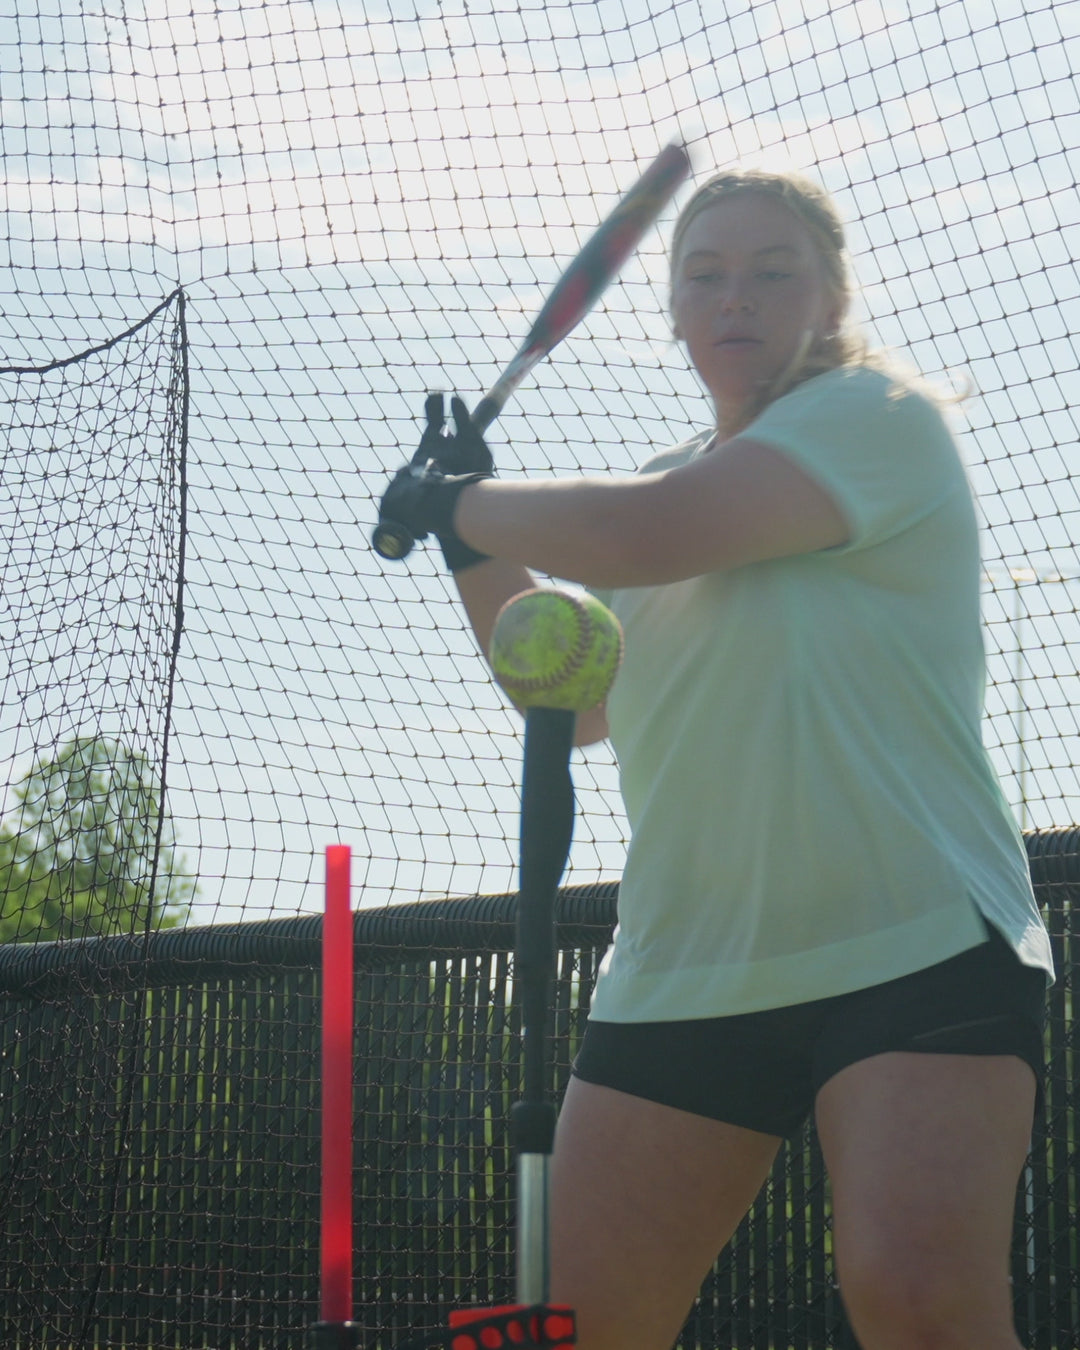 Elite Swing Trainer Tee Attachment | The Hit Doctor MD – The Baseball Home